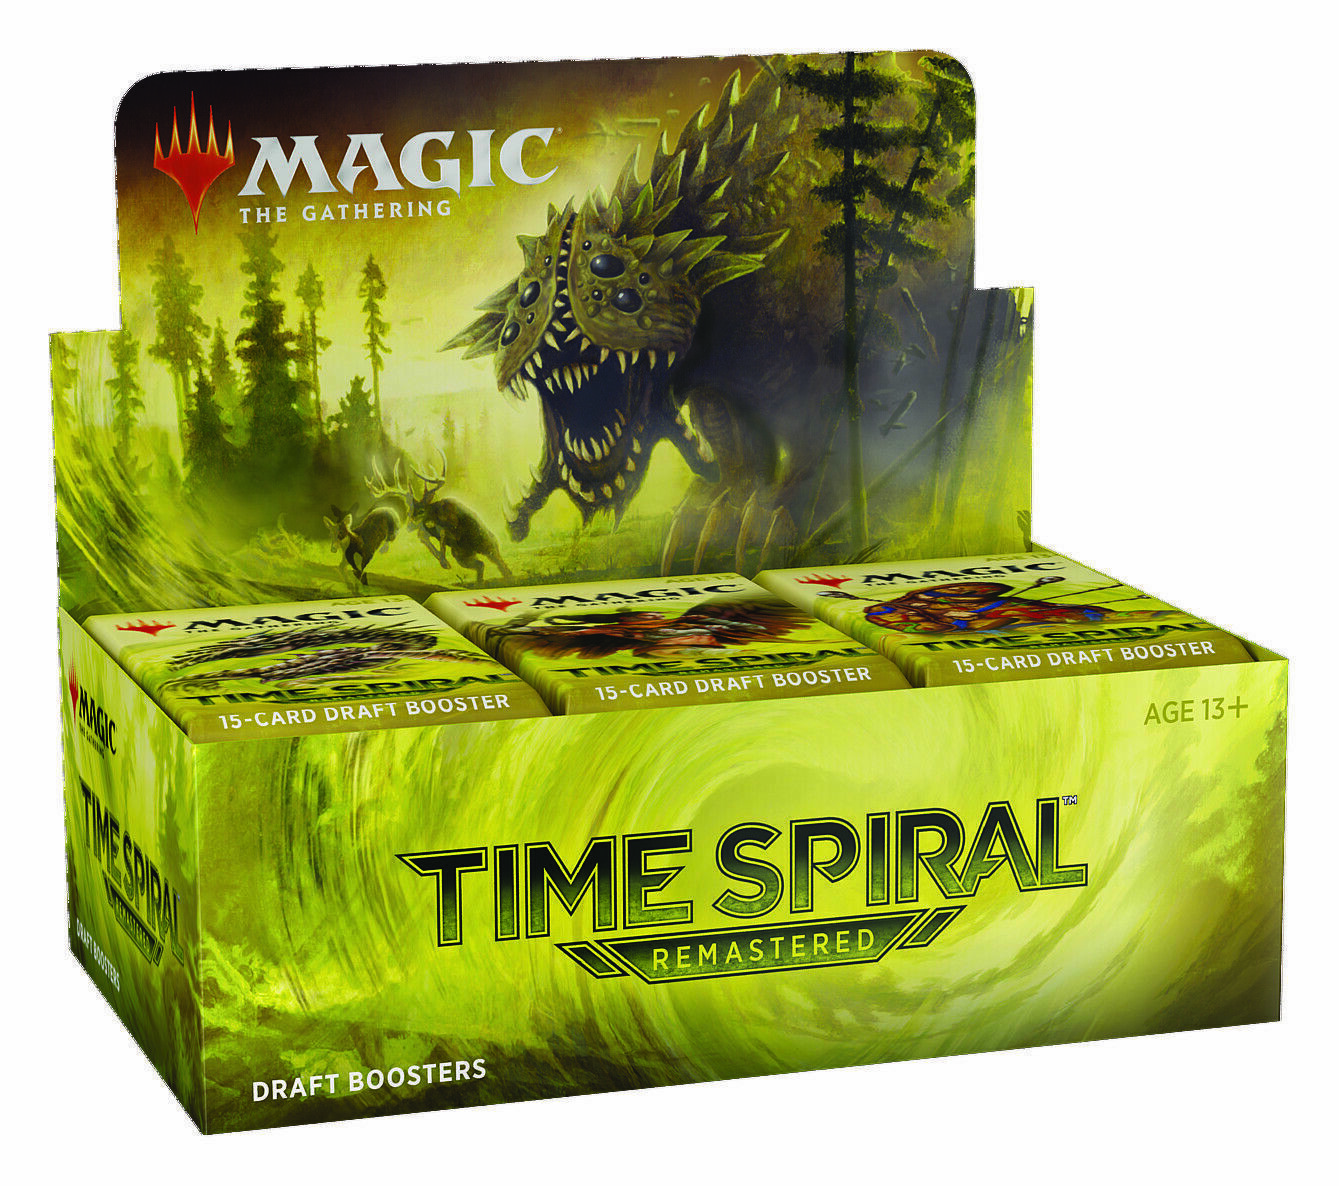 Magic: The Gathering TCG Time Spiral Remastered Draft Booster Box